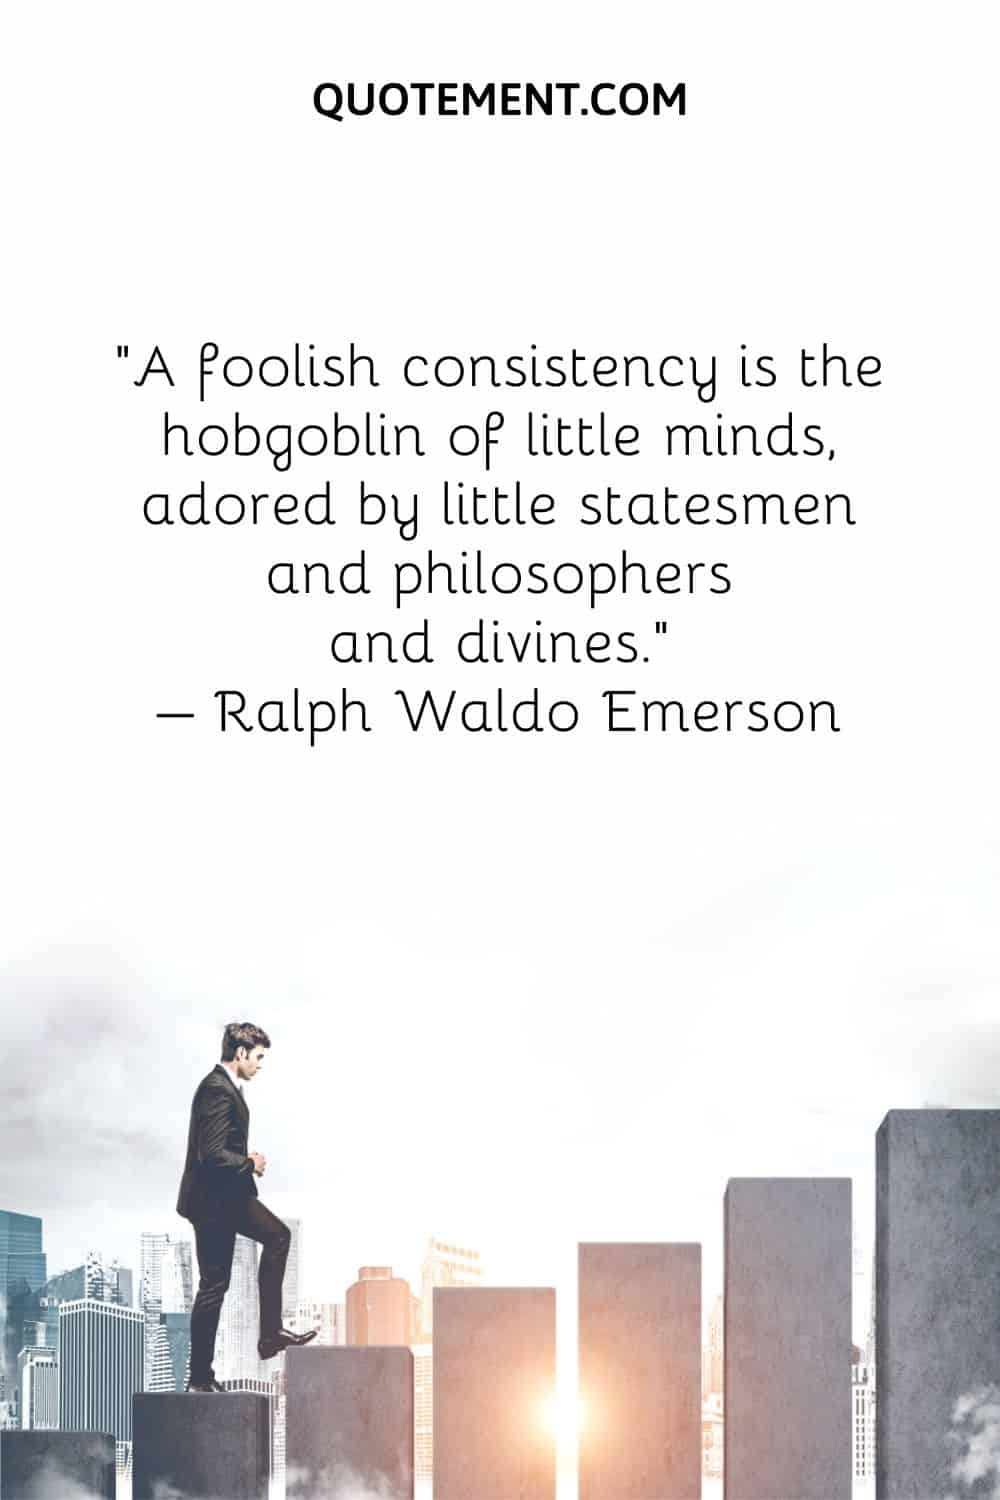 A foolish consistency is the hobgoblin of little minds, adored by little statesmen and philosophers and divines